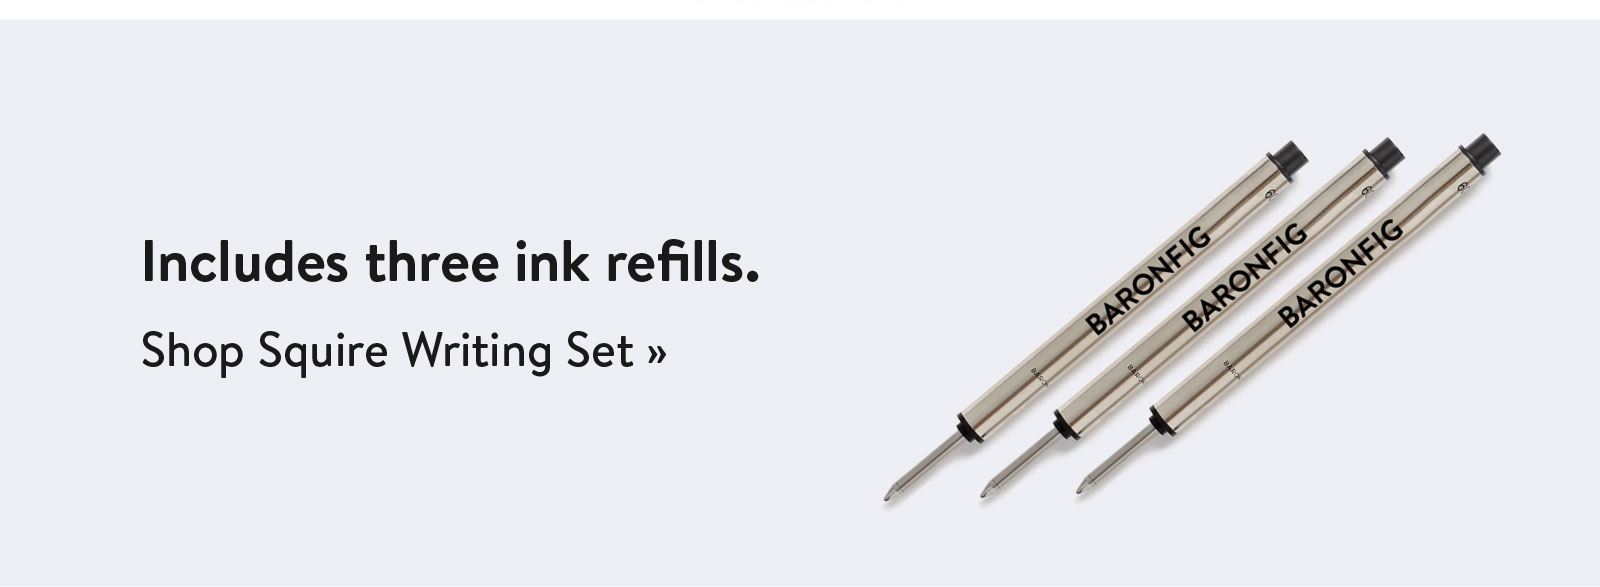 Includes three ink refills. Shop Squire Writing Set ?